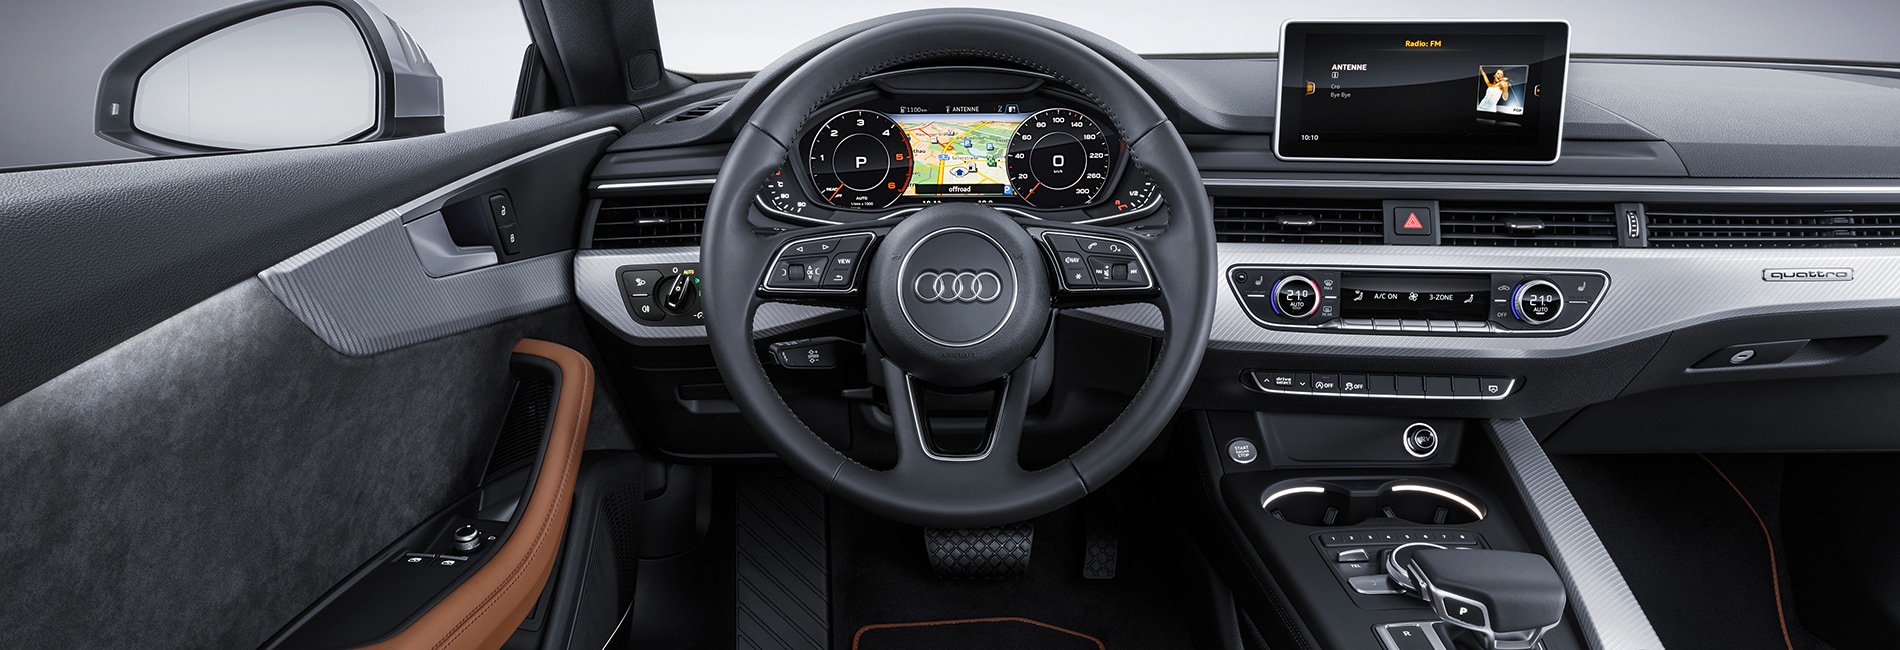 Audi A5 Interior Vehicle Features